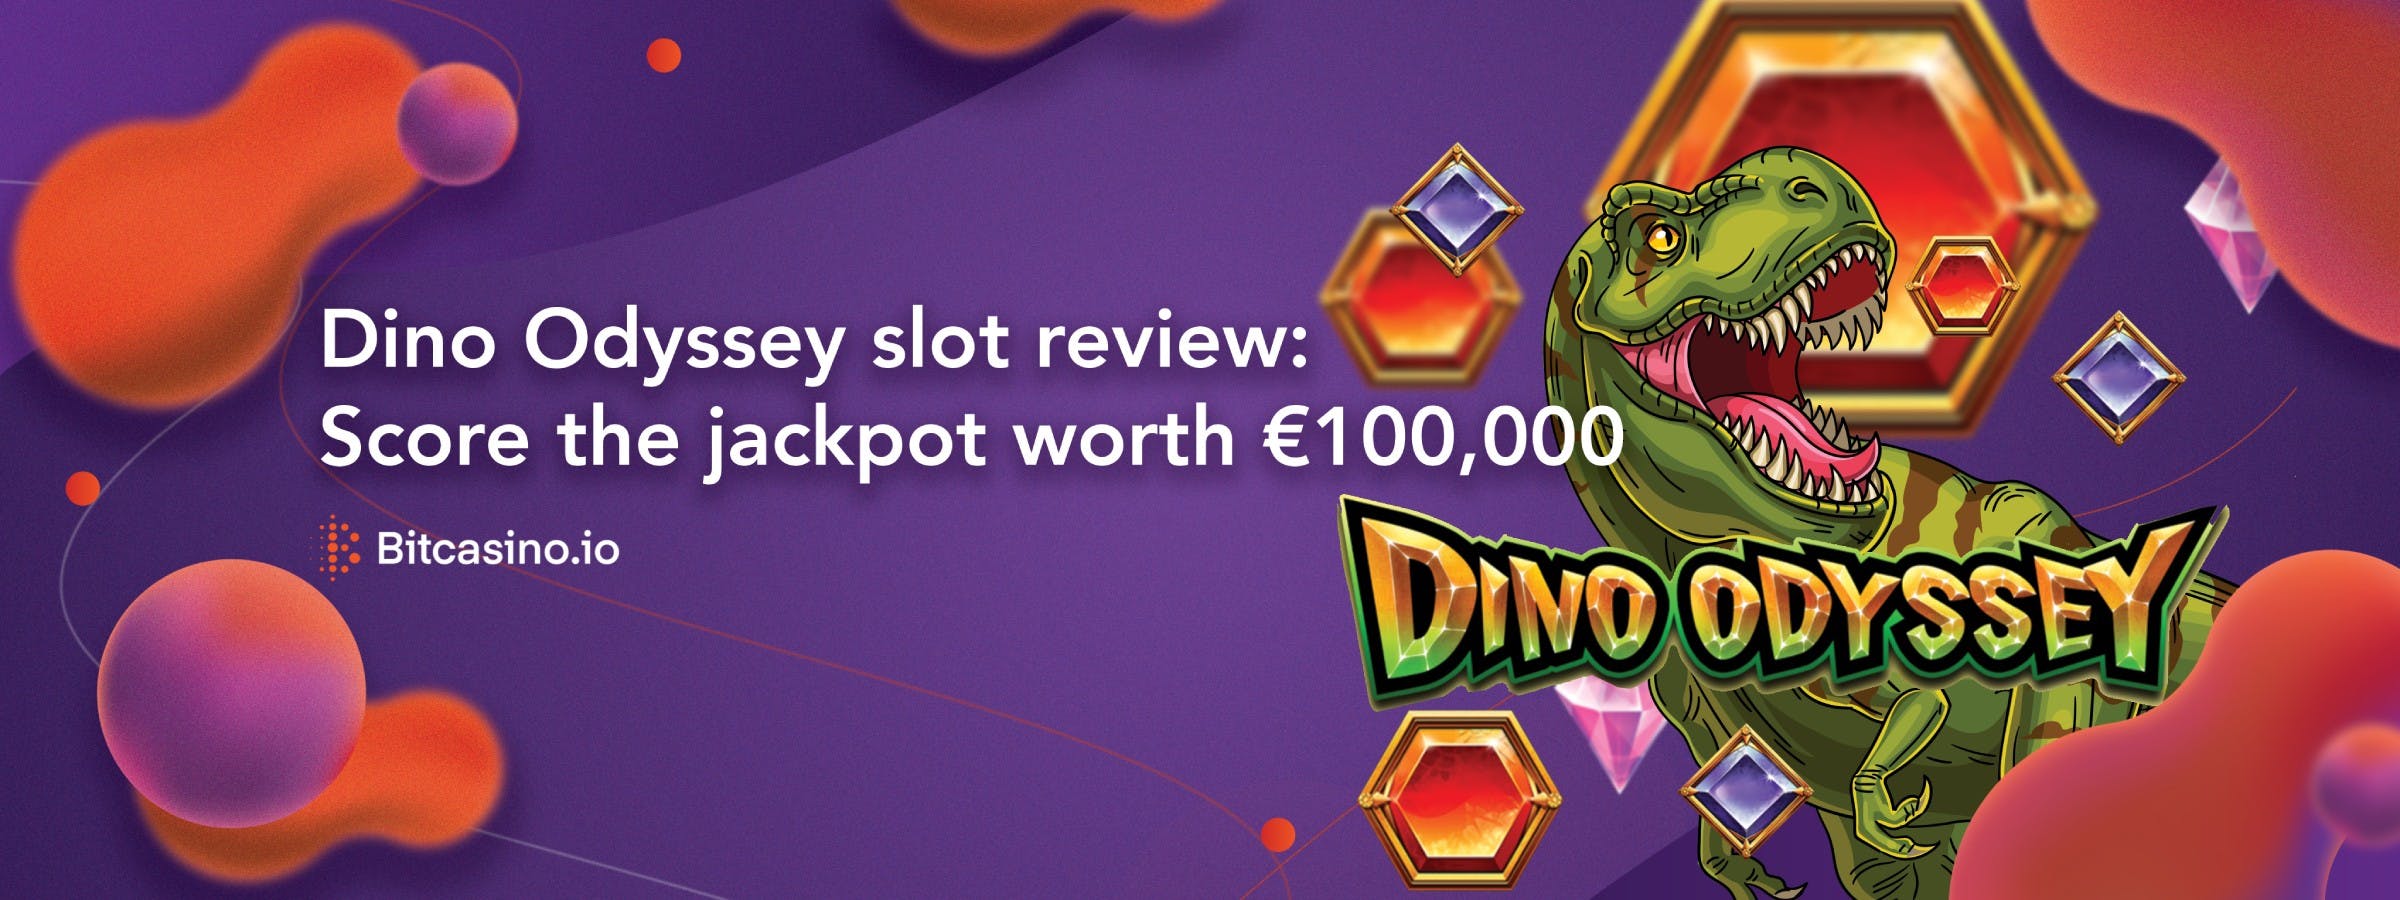 Dino Odyssey slot review: Score the jackpot worth €100,000